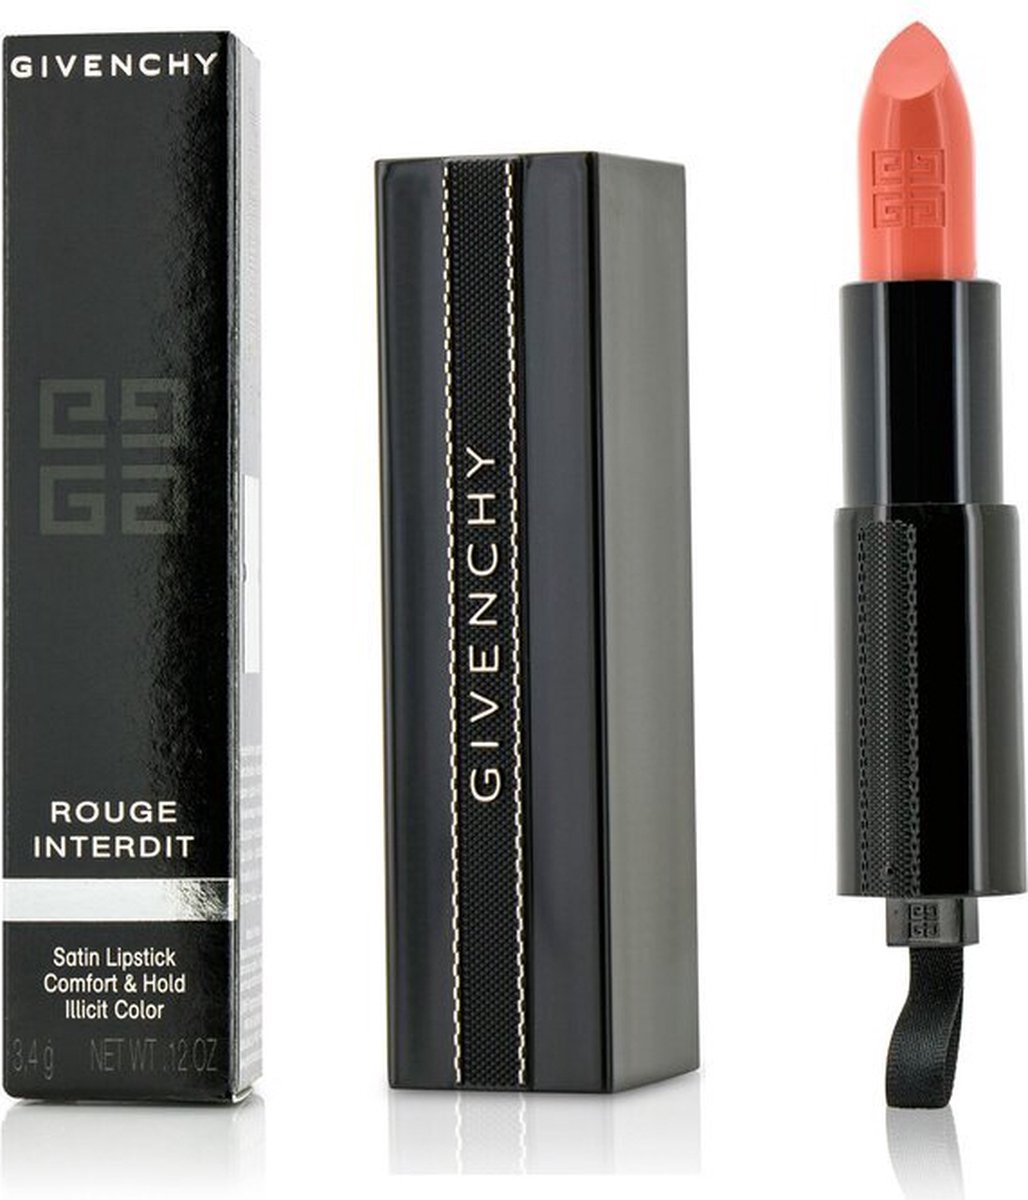 GIVENCHY ROUGE INTERDIT 17 FLASH CORAL SATINE 3.4g